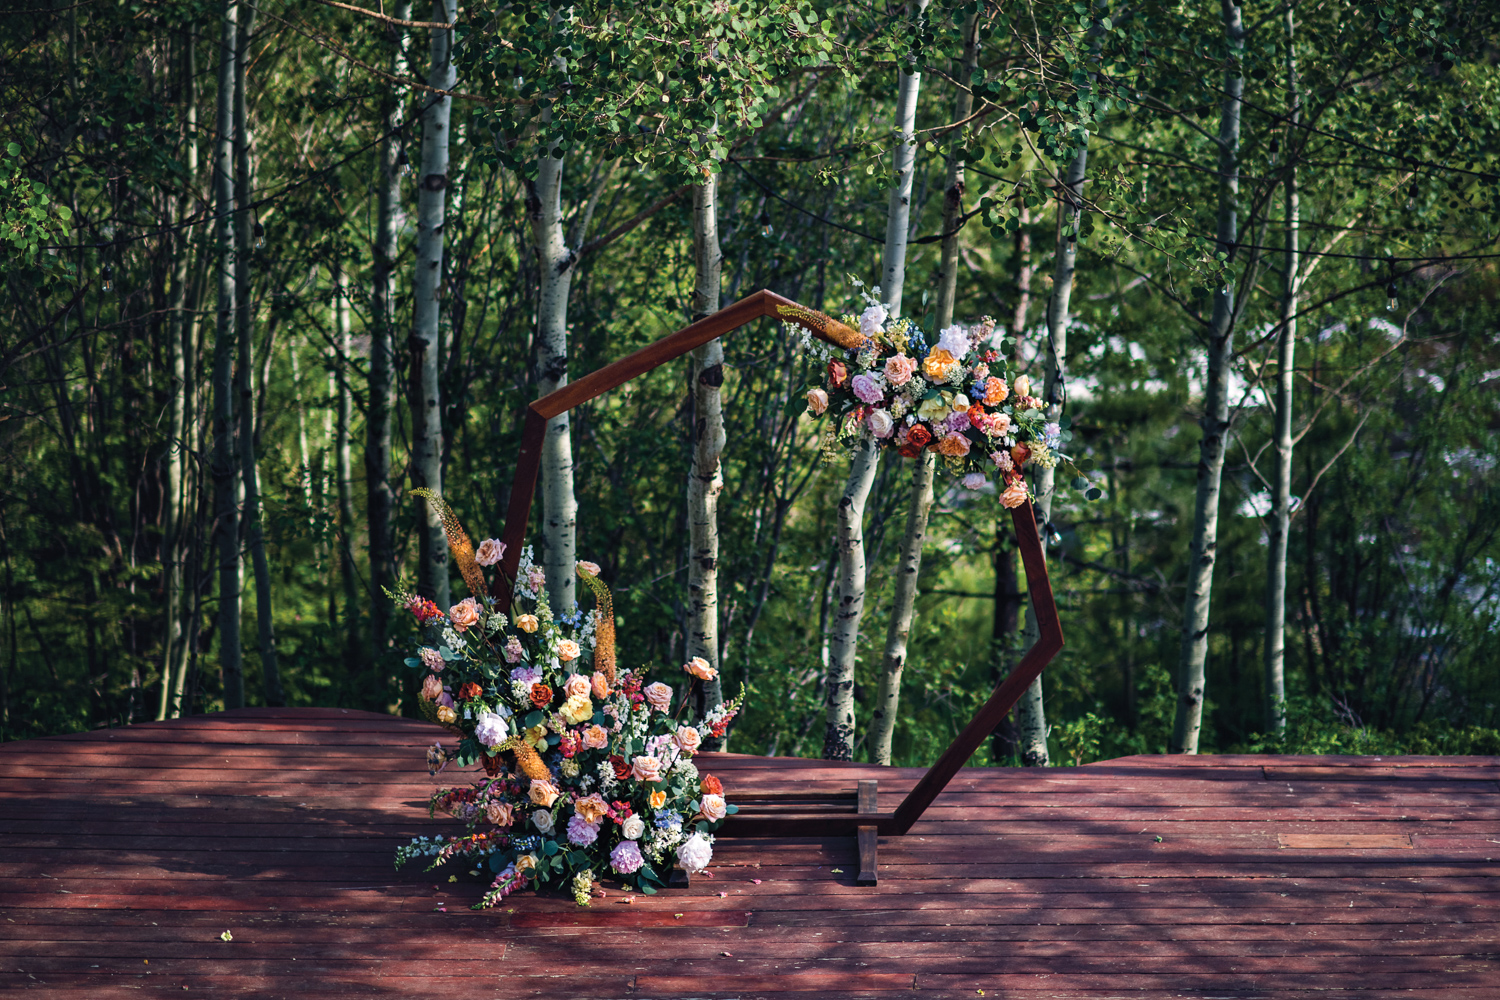 floral creation based on a wood heptagonal structure by Wild Blossoms Studio